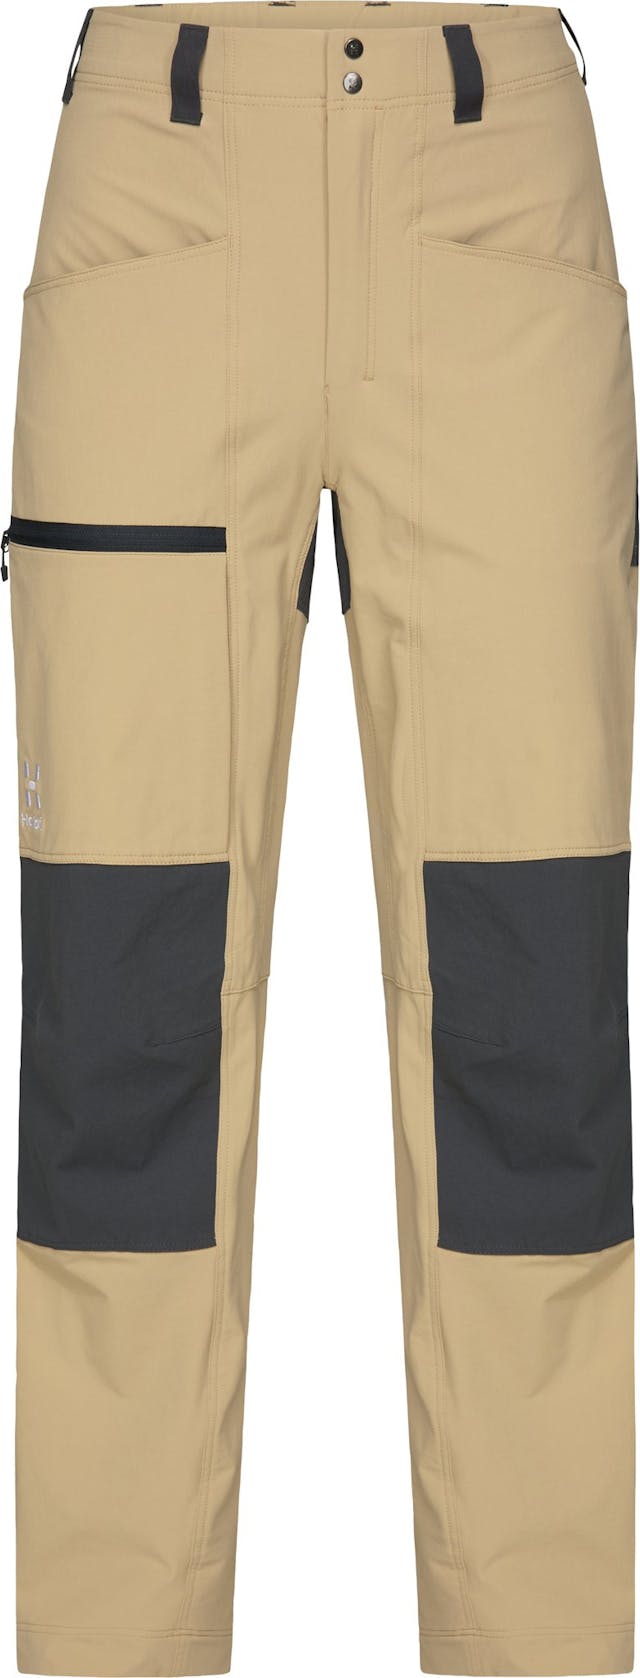 Product image for Mid Relaxed Pant - Women's